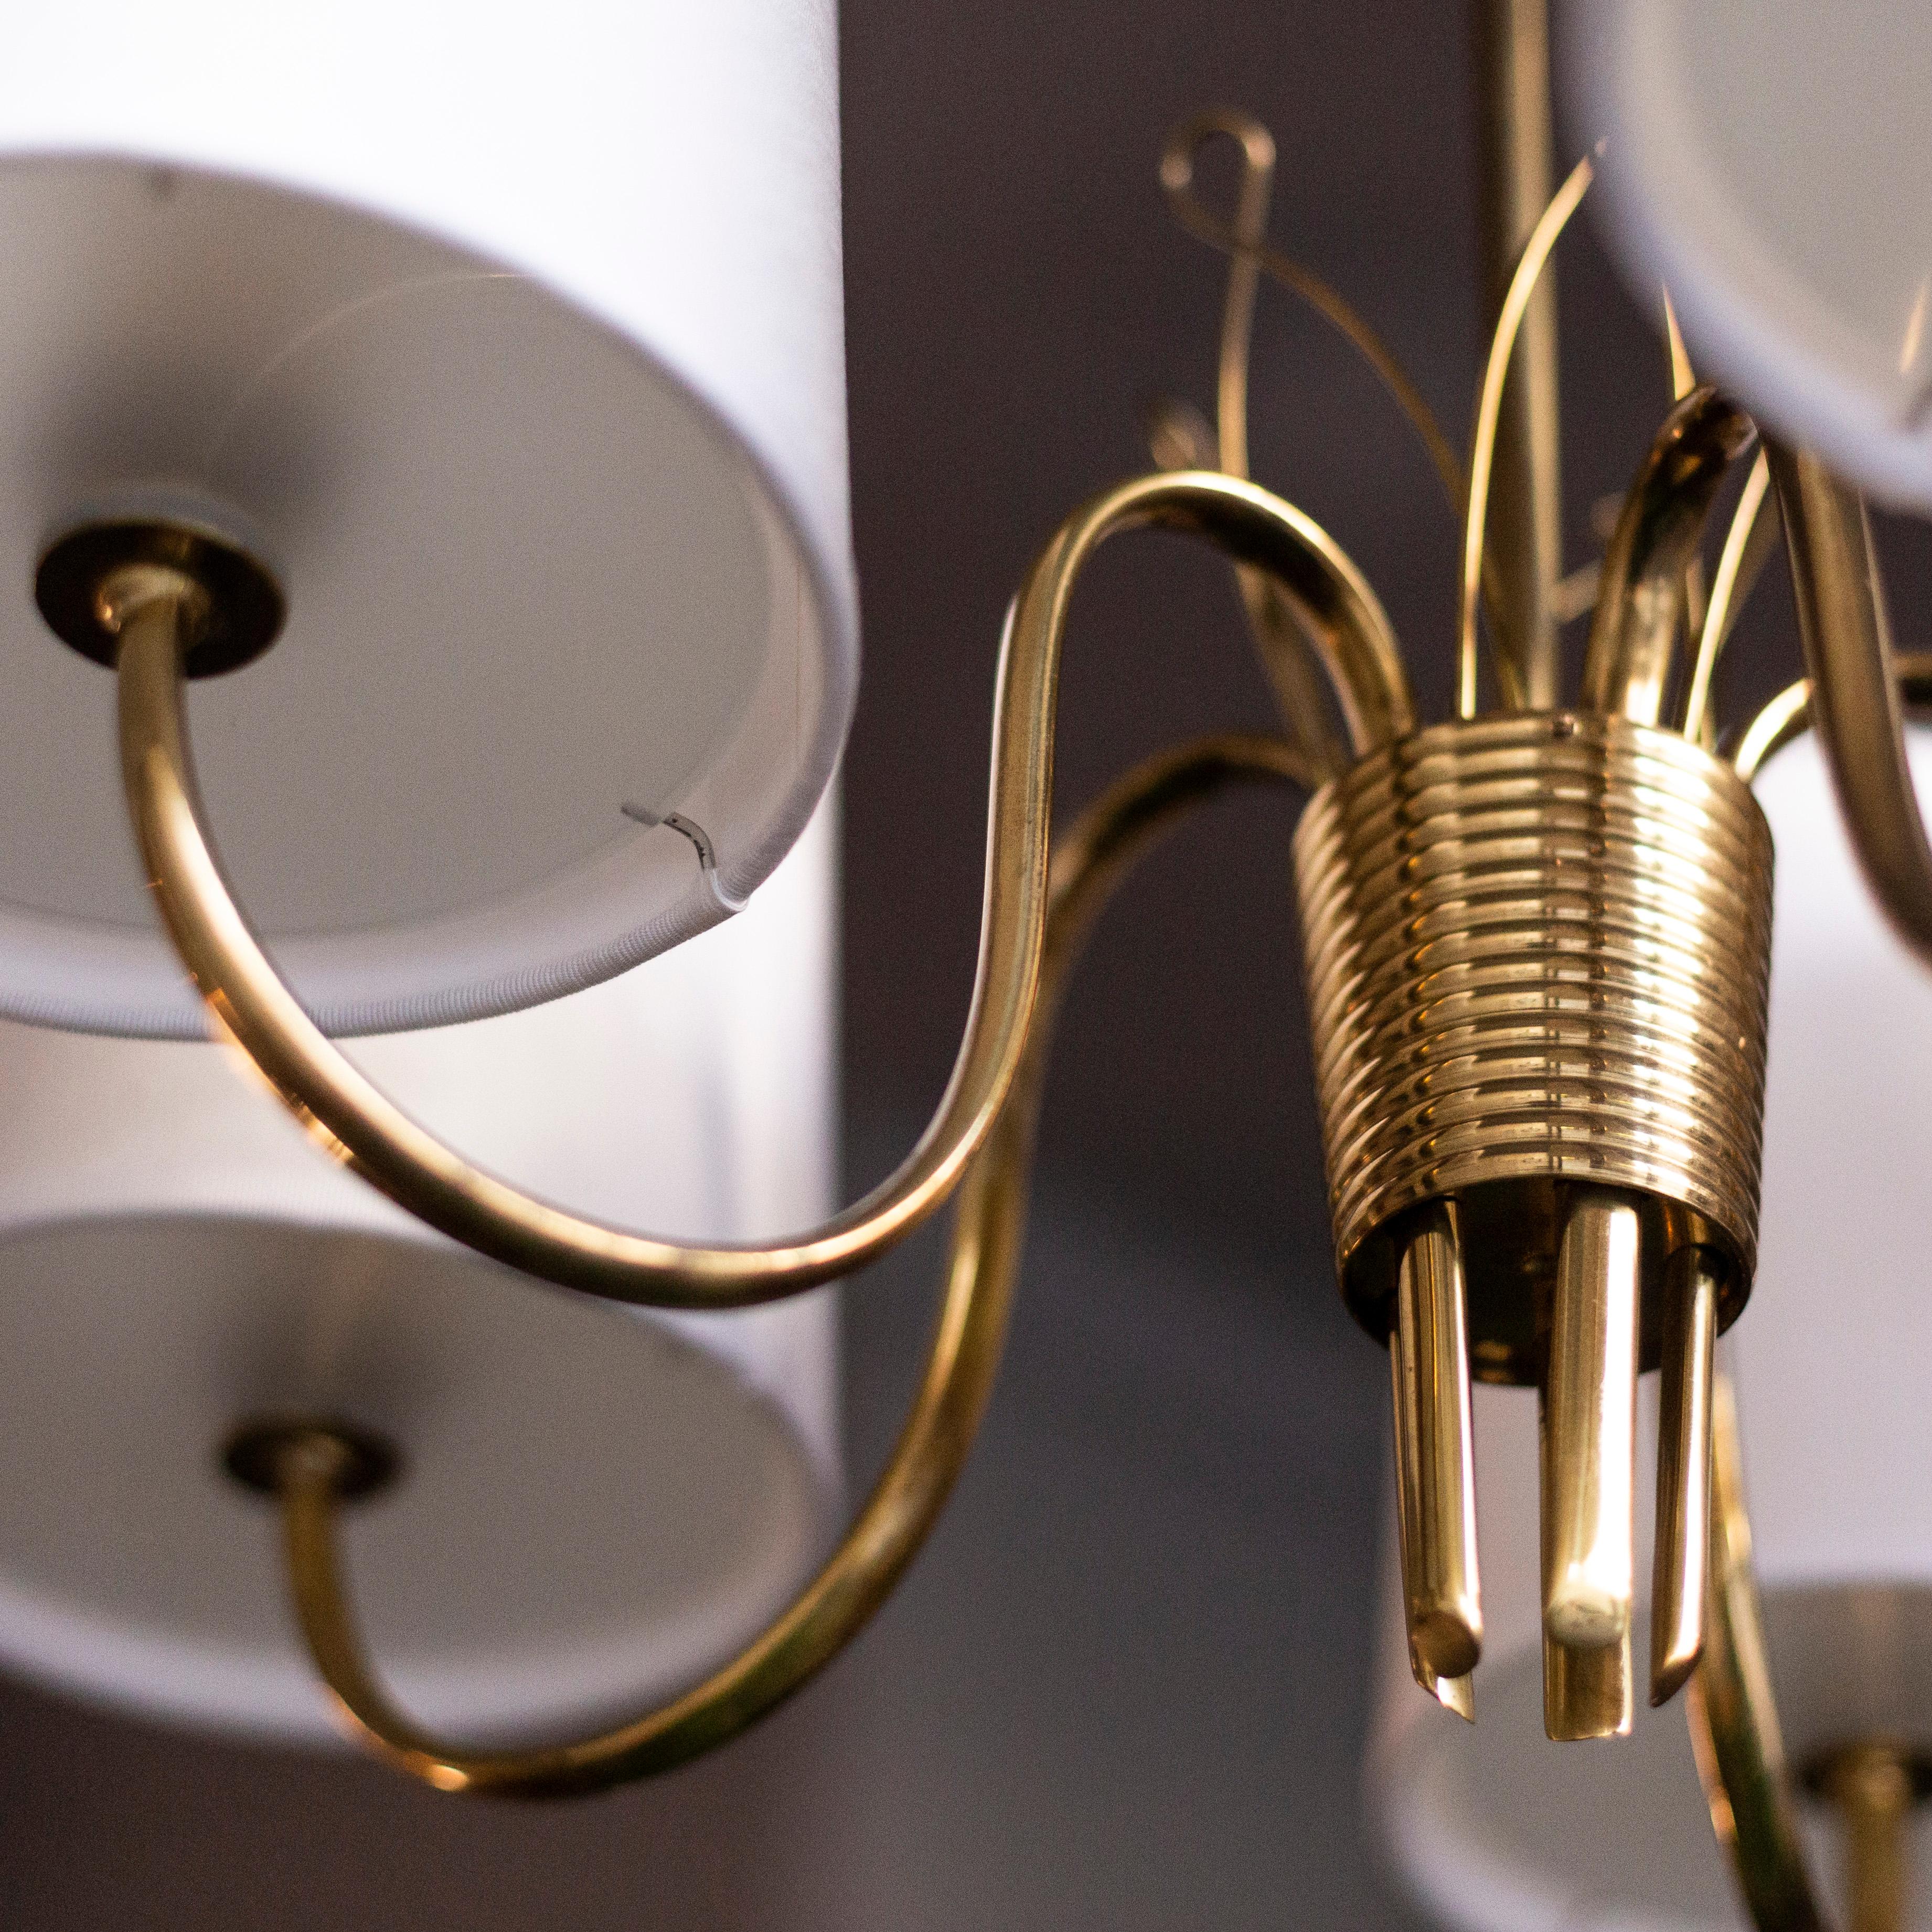 A 1940s five-arm chandelier designed by Finland’s most renowned lighting designer, Paavo Tynell. Handcrafted in the Taito workshop, this chandelier brilliantly showcases Tynell’s attention to detail and ability to create lighting with an elegant